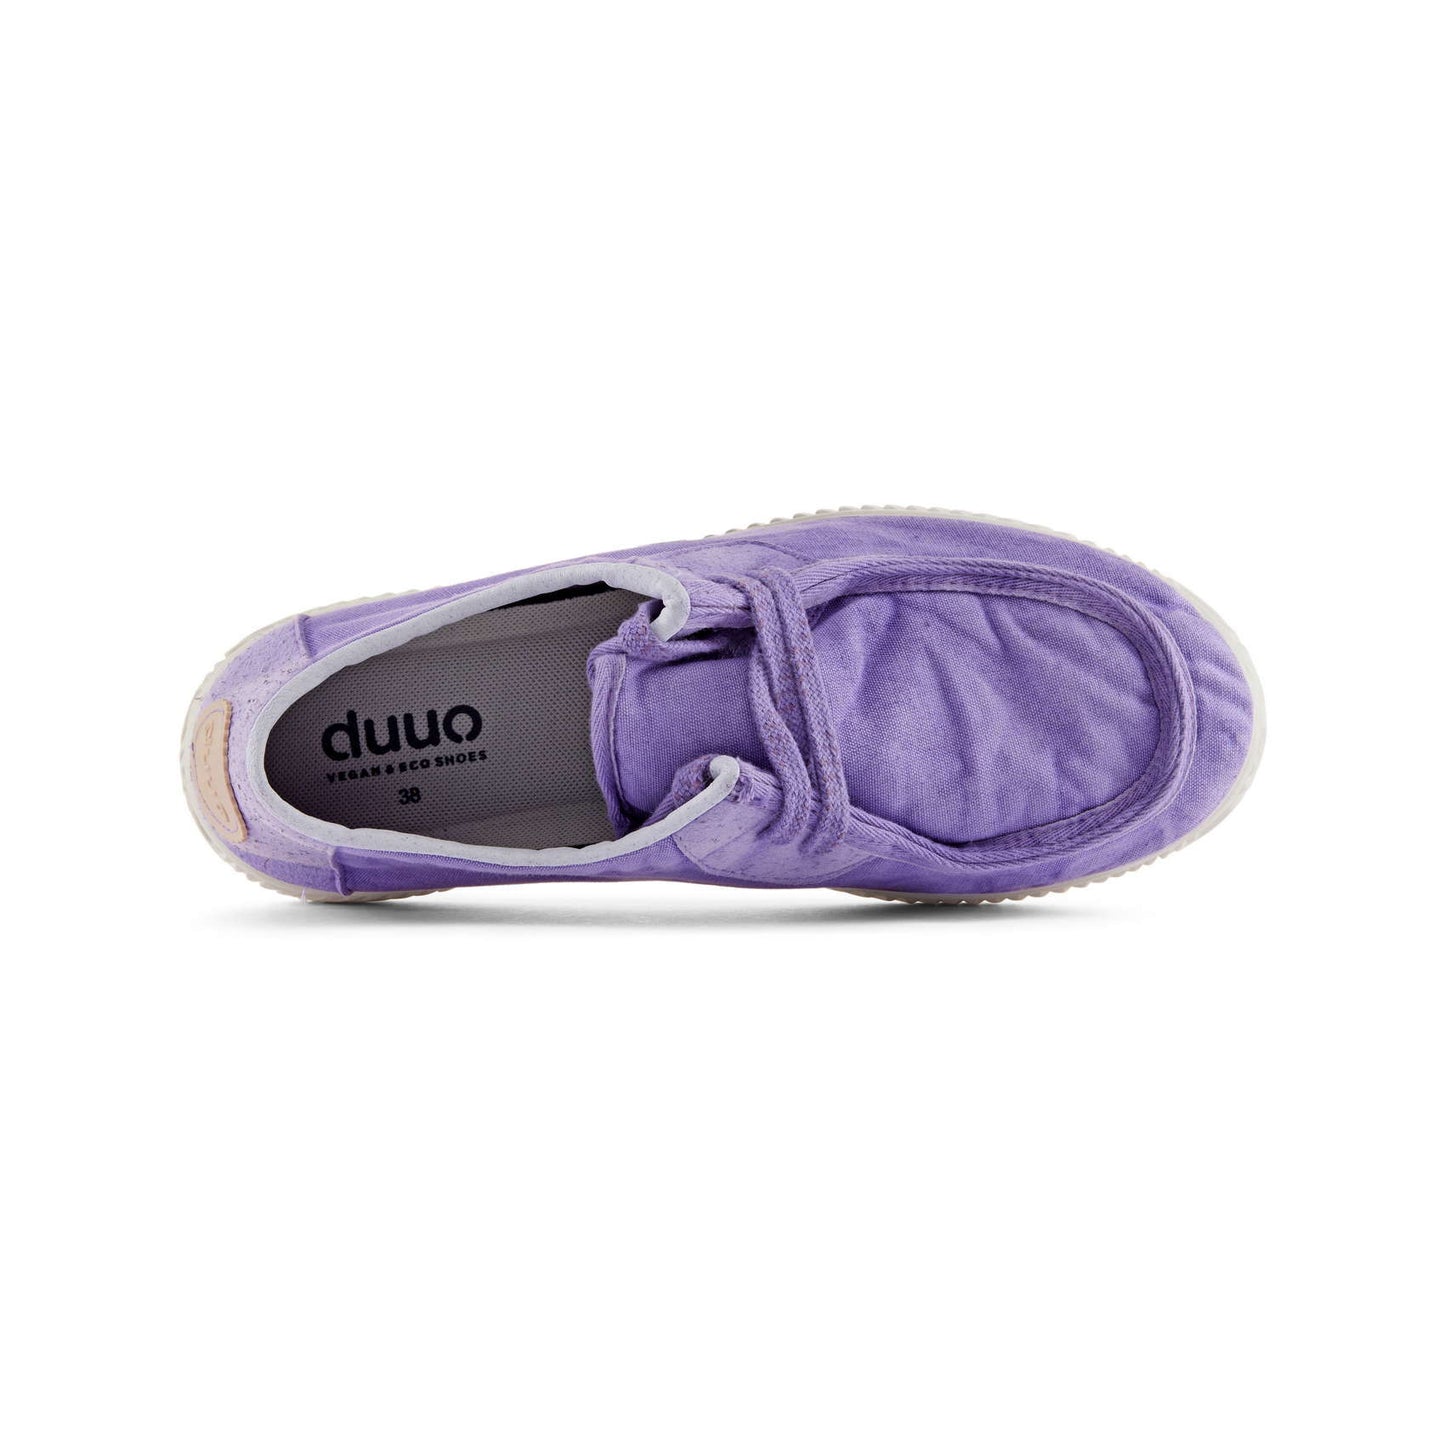 DUUO | SNEAKERS MUJER | ONA WALABY WASHED 050 VIOLET 78) | LILA